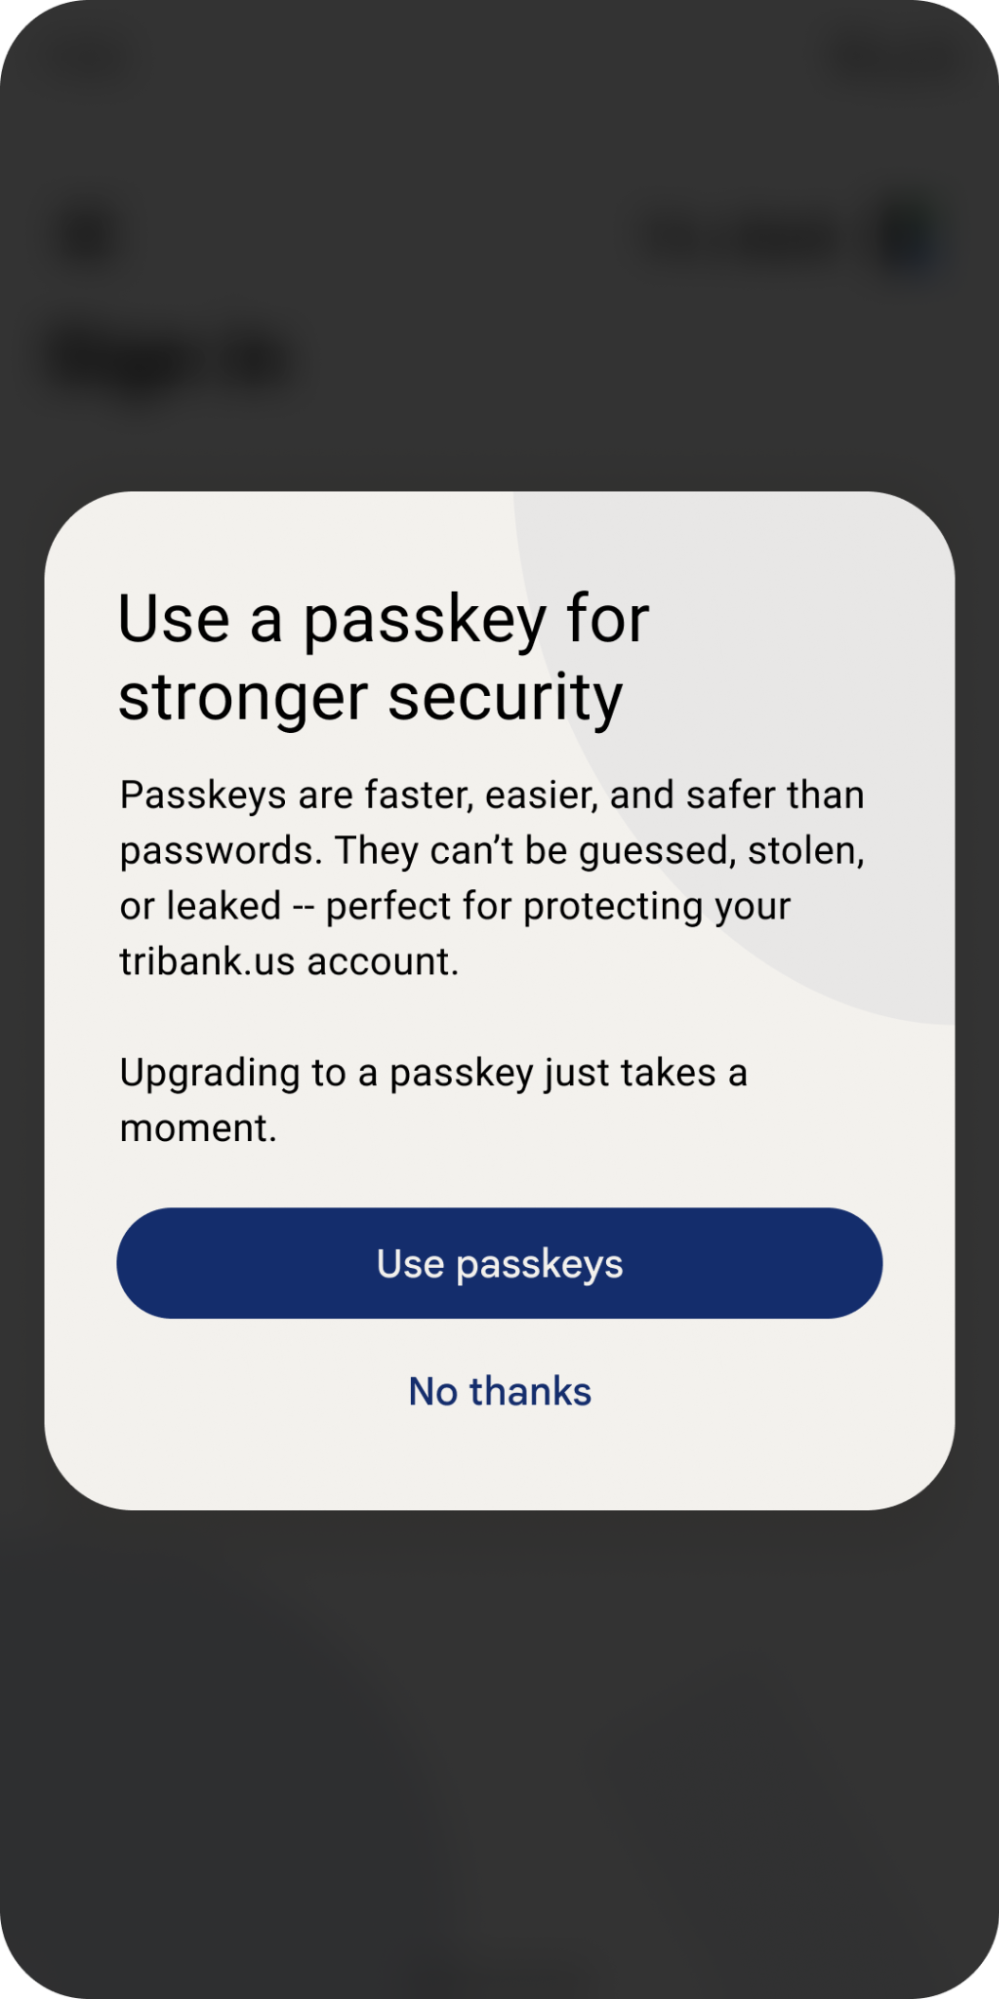 Pop-up offering user to use passkeys for faster and safer passwords